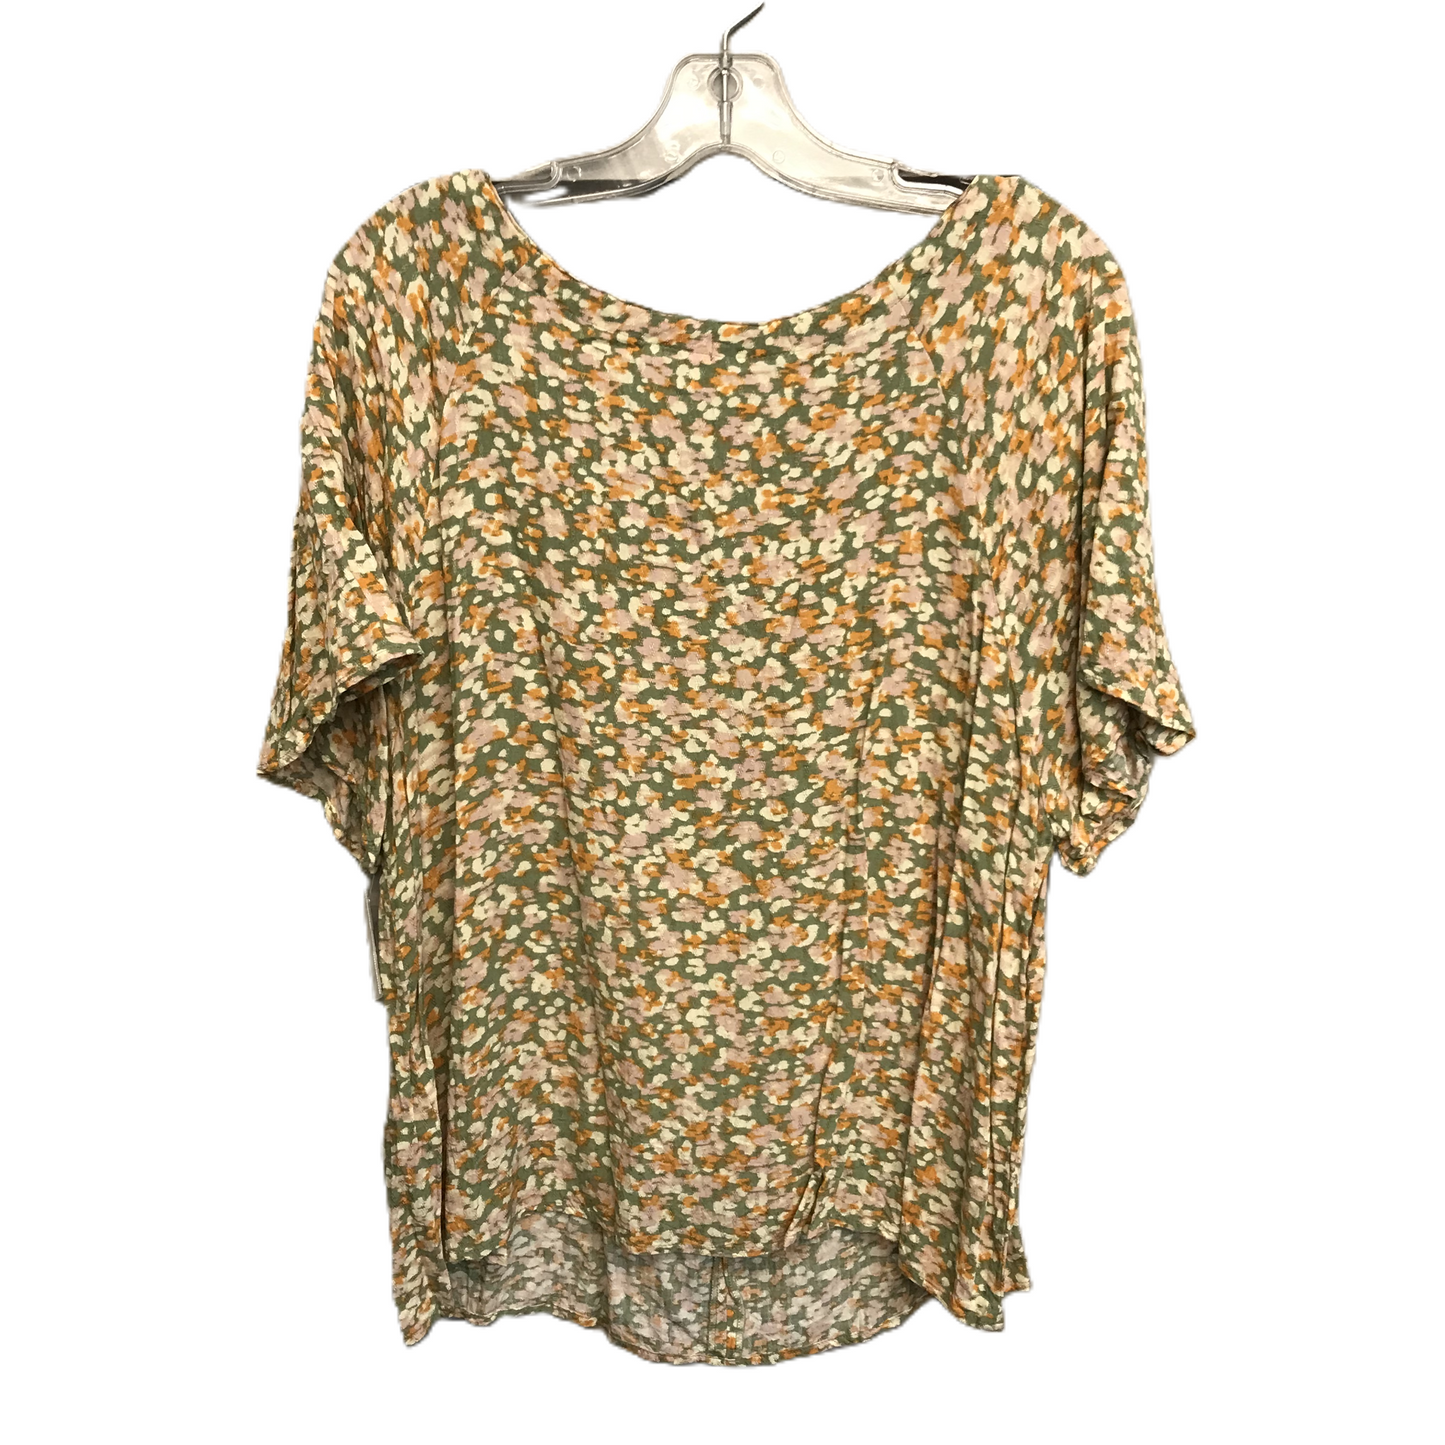 Floral Print Top Short Sleeve By Melrose And Market, Size: L